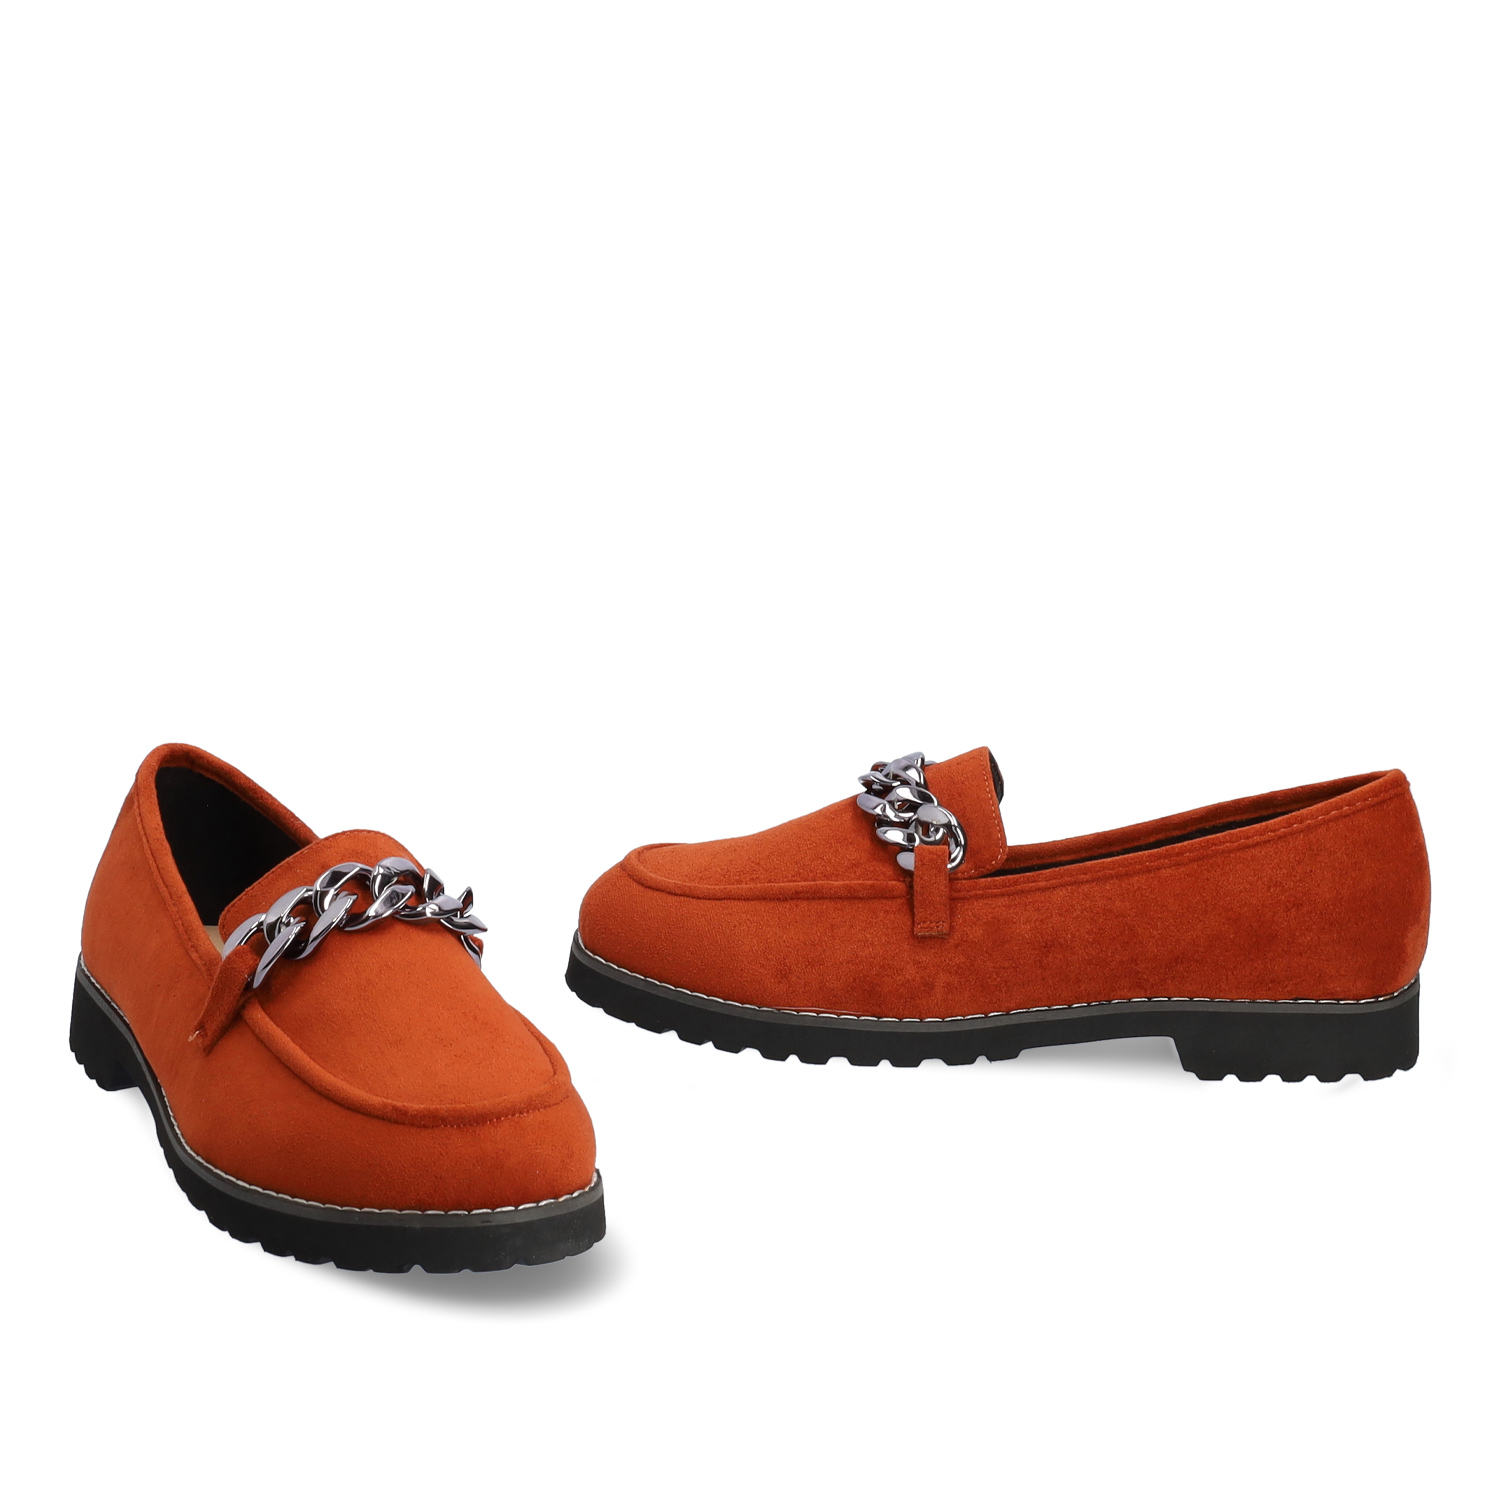 Moccasins in brick-red faux suede and track sole 